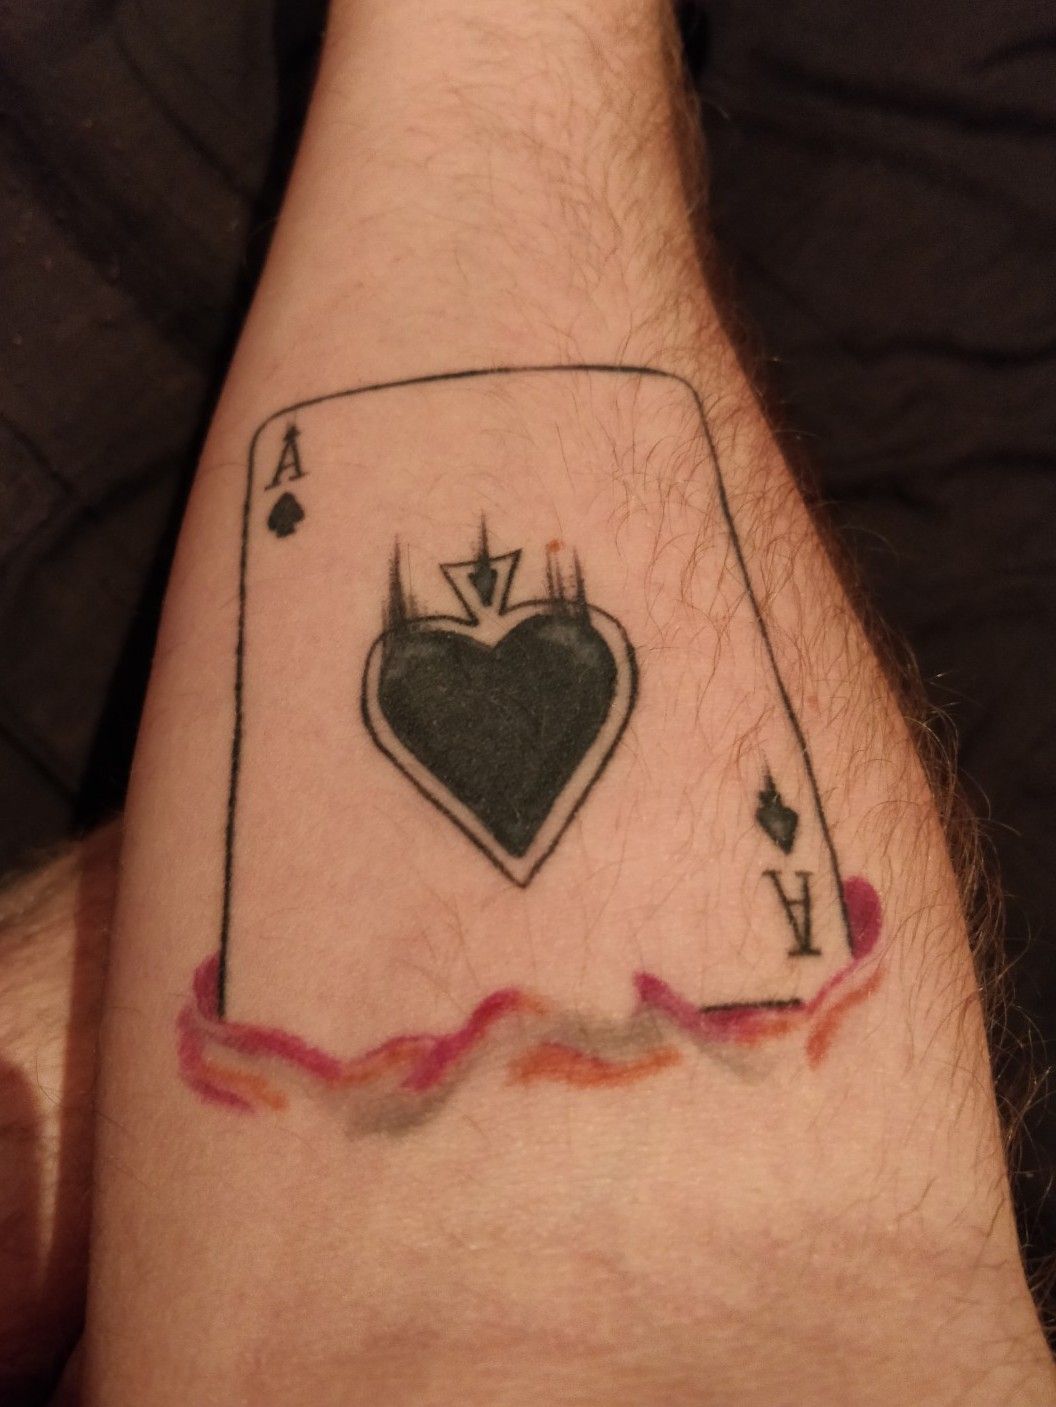 I just have an ace up my sleeve   Tattoos by Mikey V  Facebook